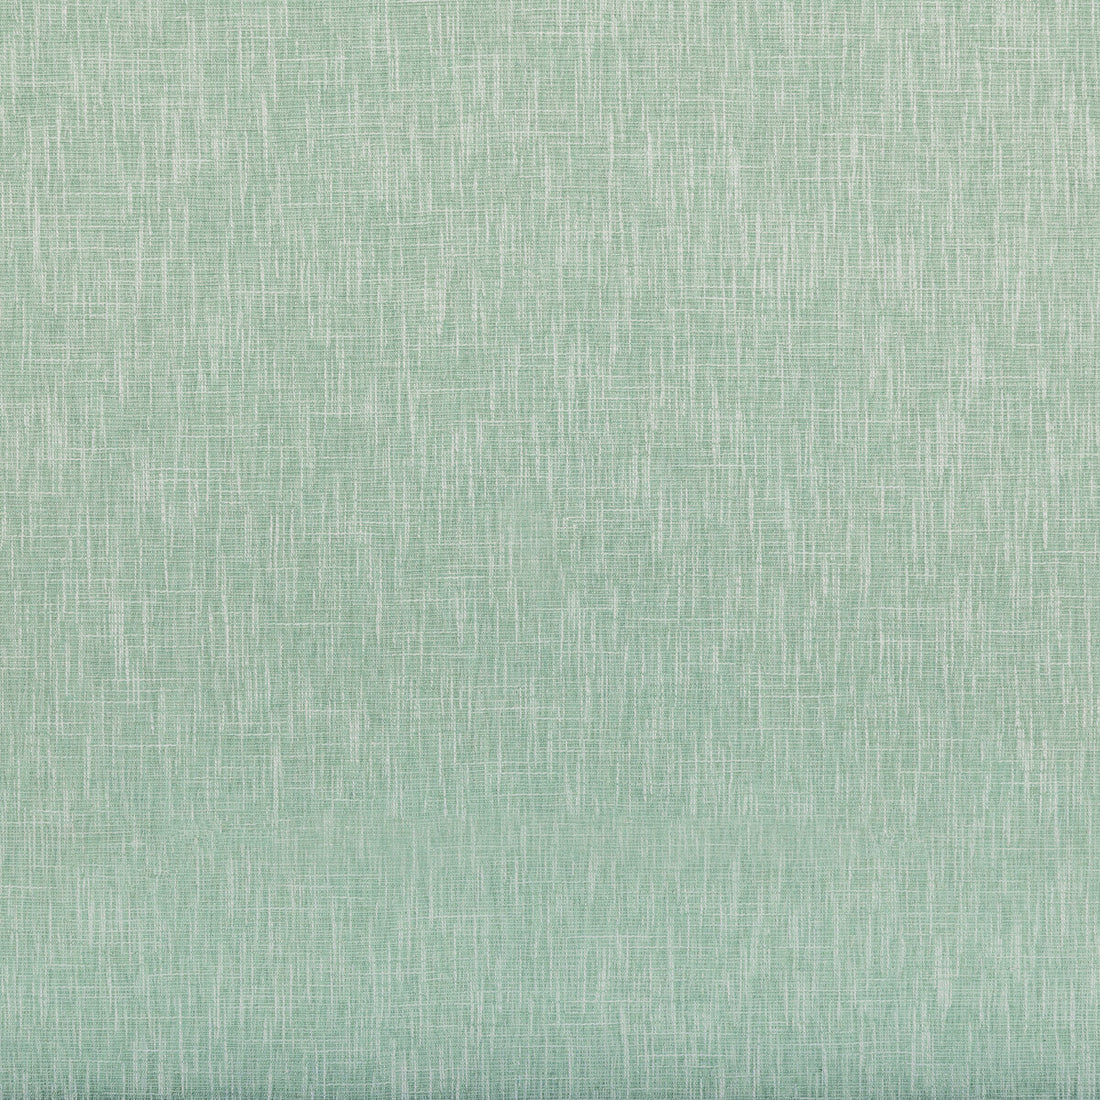 Maris fabric in spa color - pattern 35923.135.0 - by Kravet Basics in the Monterey collection